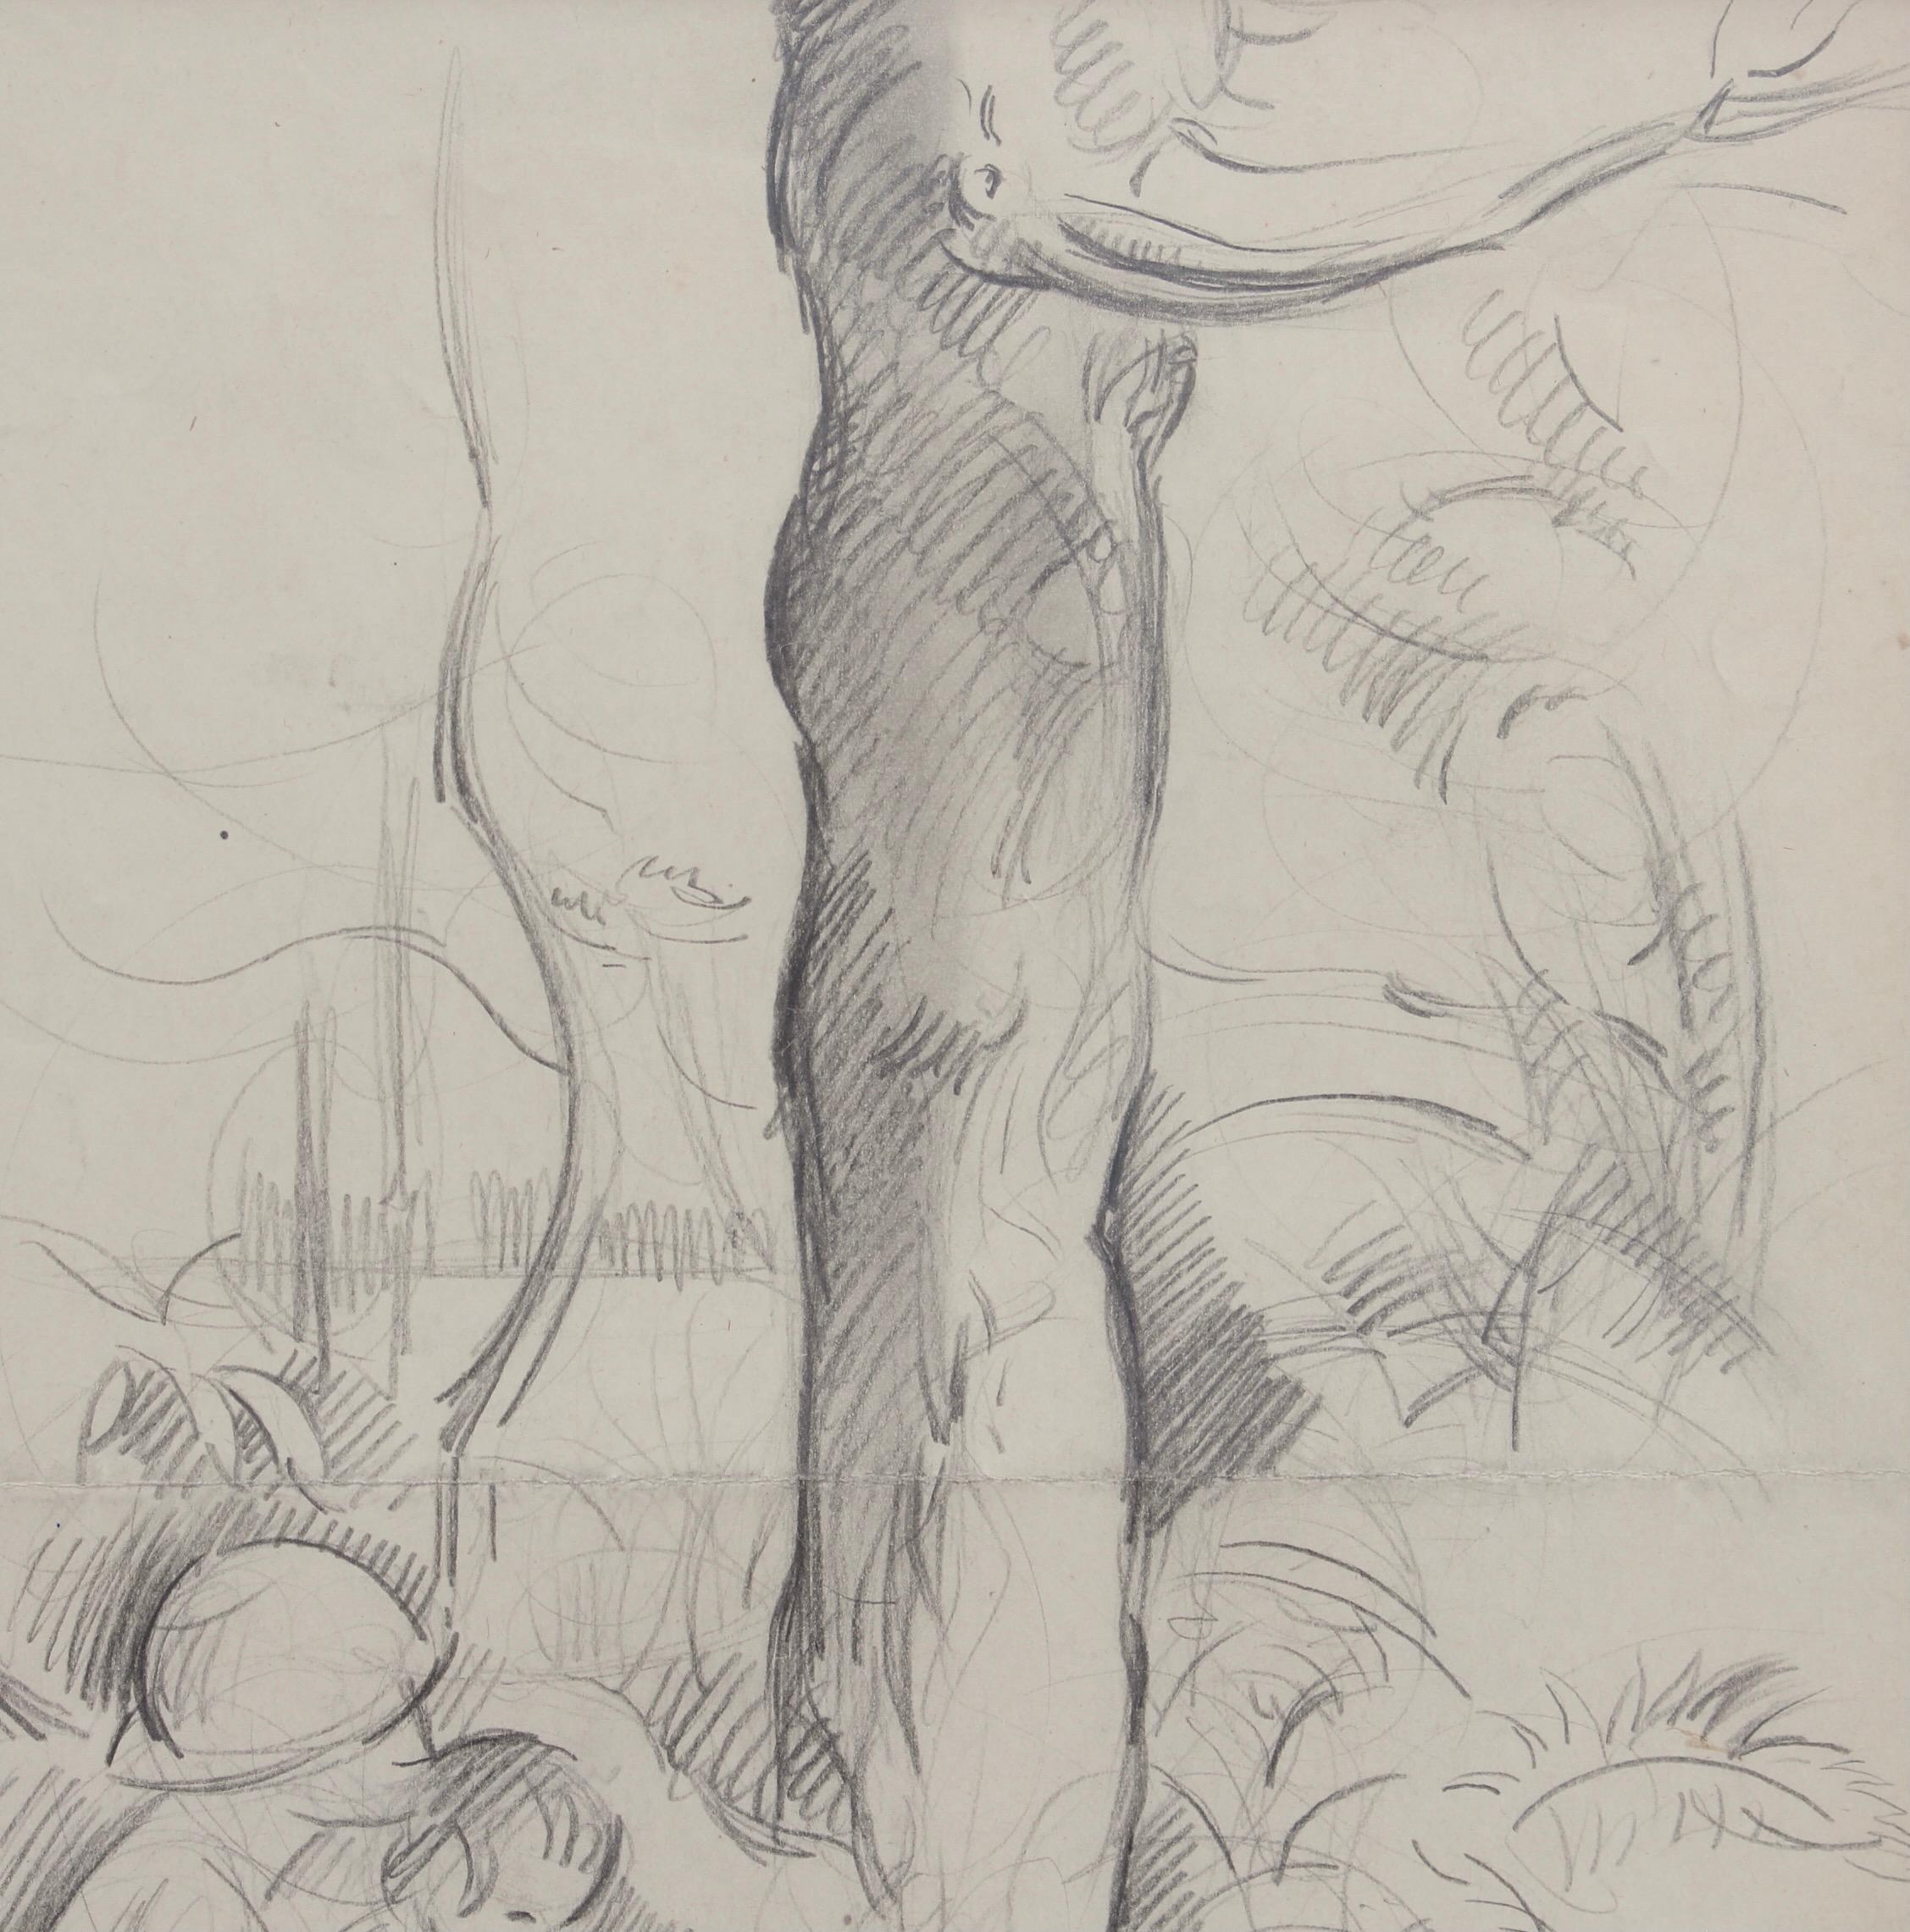 'Mother with Child Under a Tree', pencil on art paper, by French artist, Guillaume Dulac (circa 1920s). An artist known for his exquisite drawings - many are sketches for his larger oil paintings or other works, this piece's beauty lies once again